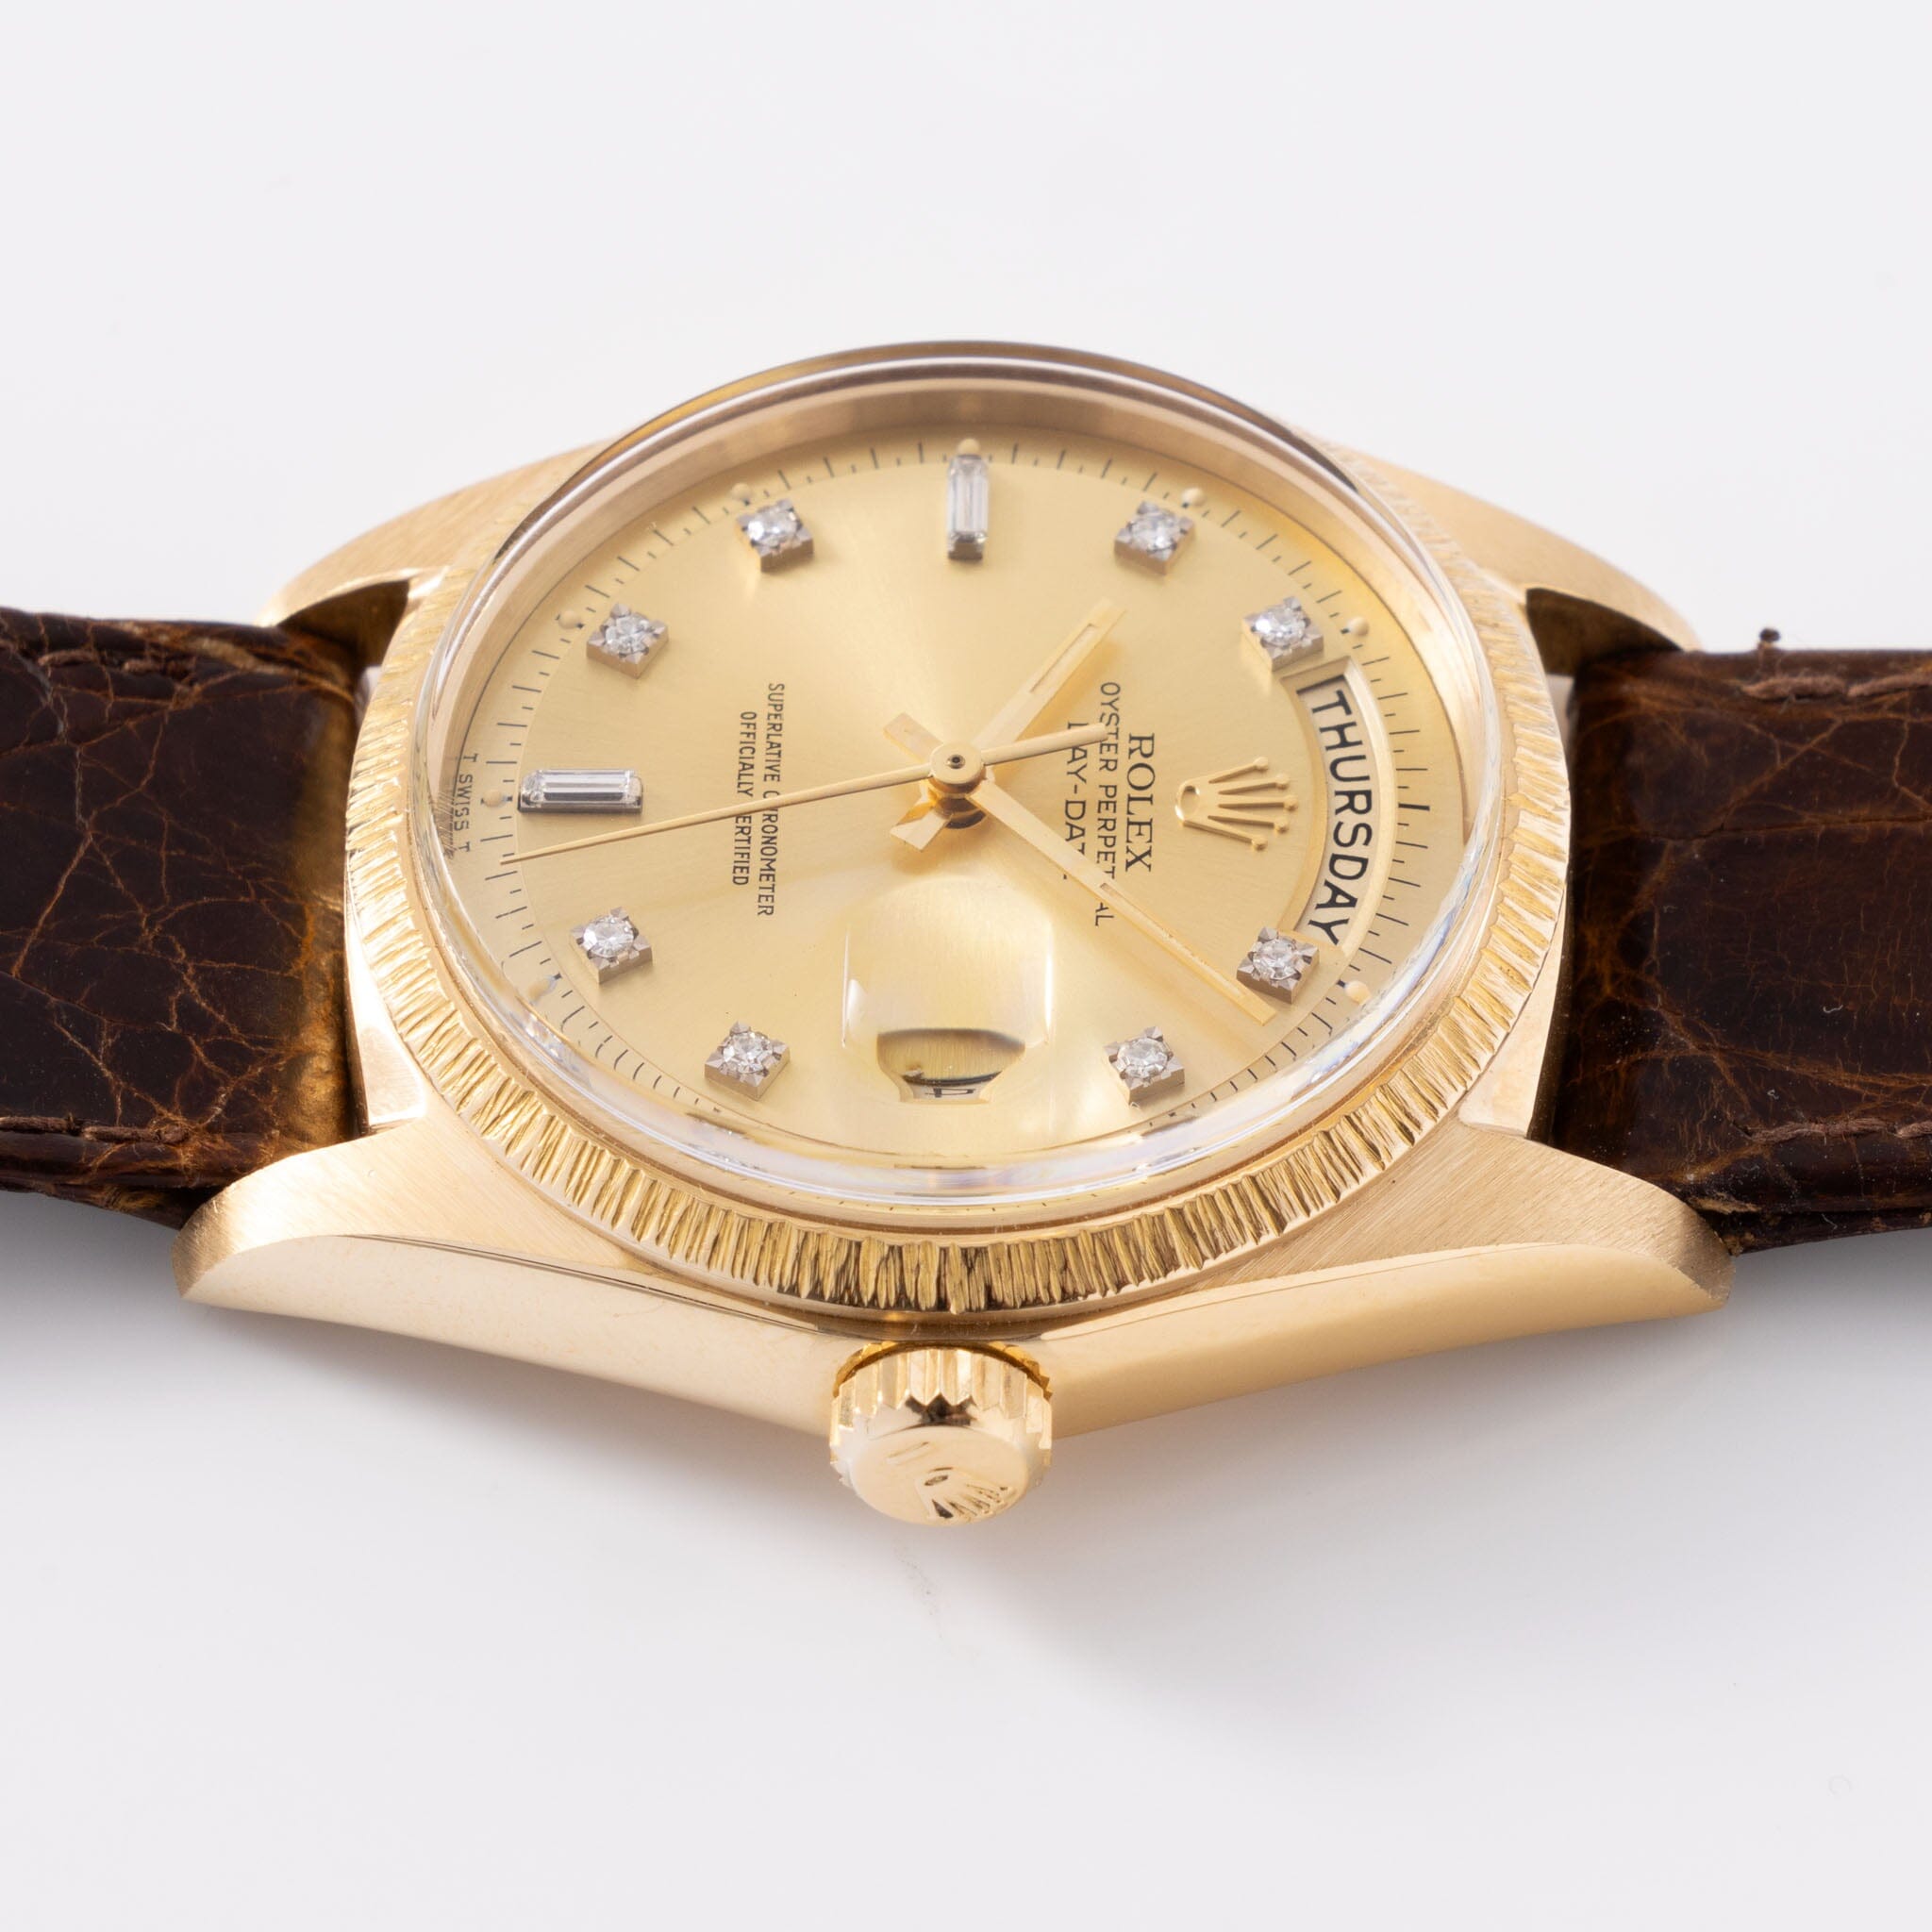 Rolex Day-Date Yellow Gold Champagne Diamond Hours Dial Ref 1807